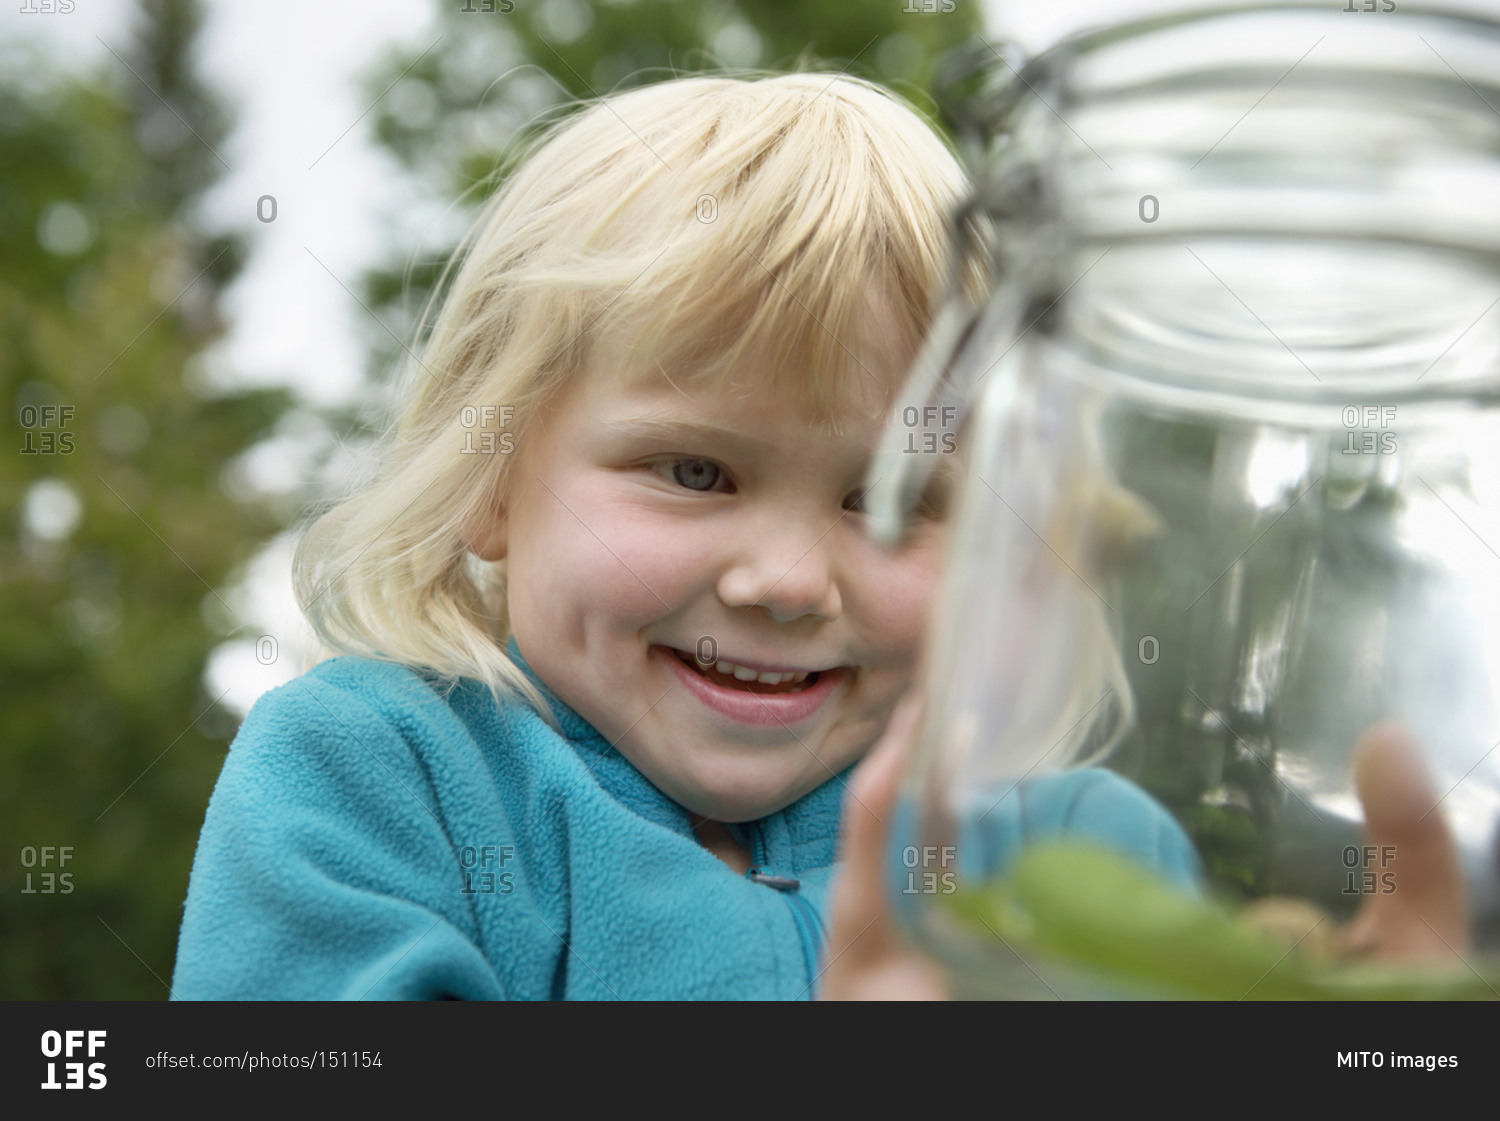 Small blonde girl collecting snails in jam-jar